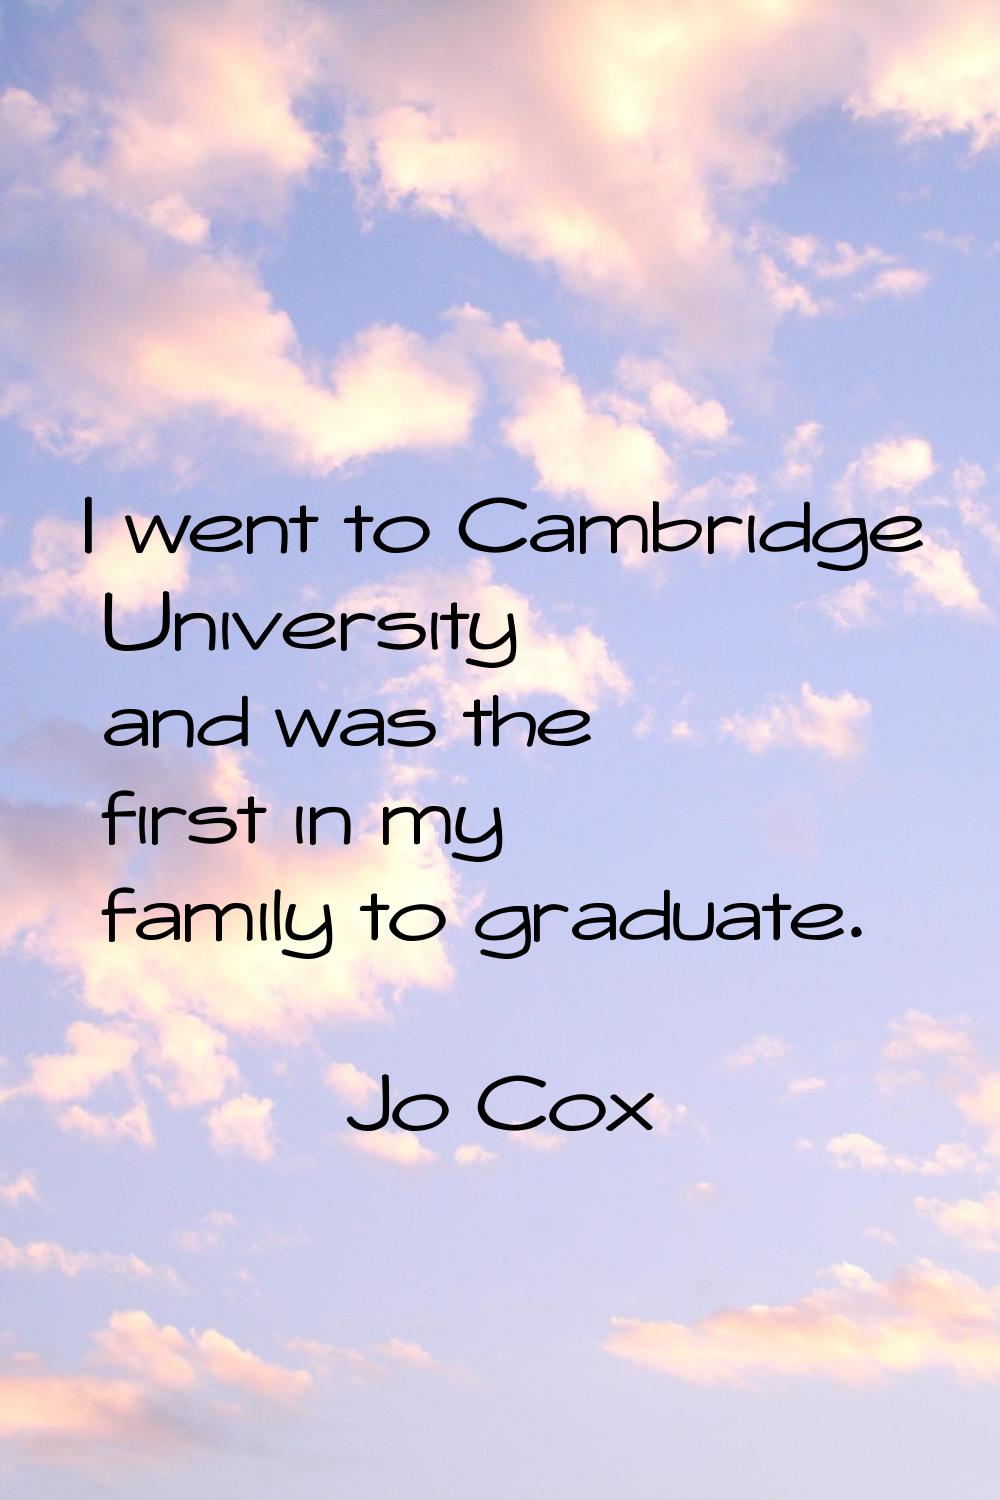 I went to Cambridge University and was the first in my family to graduate.